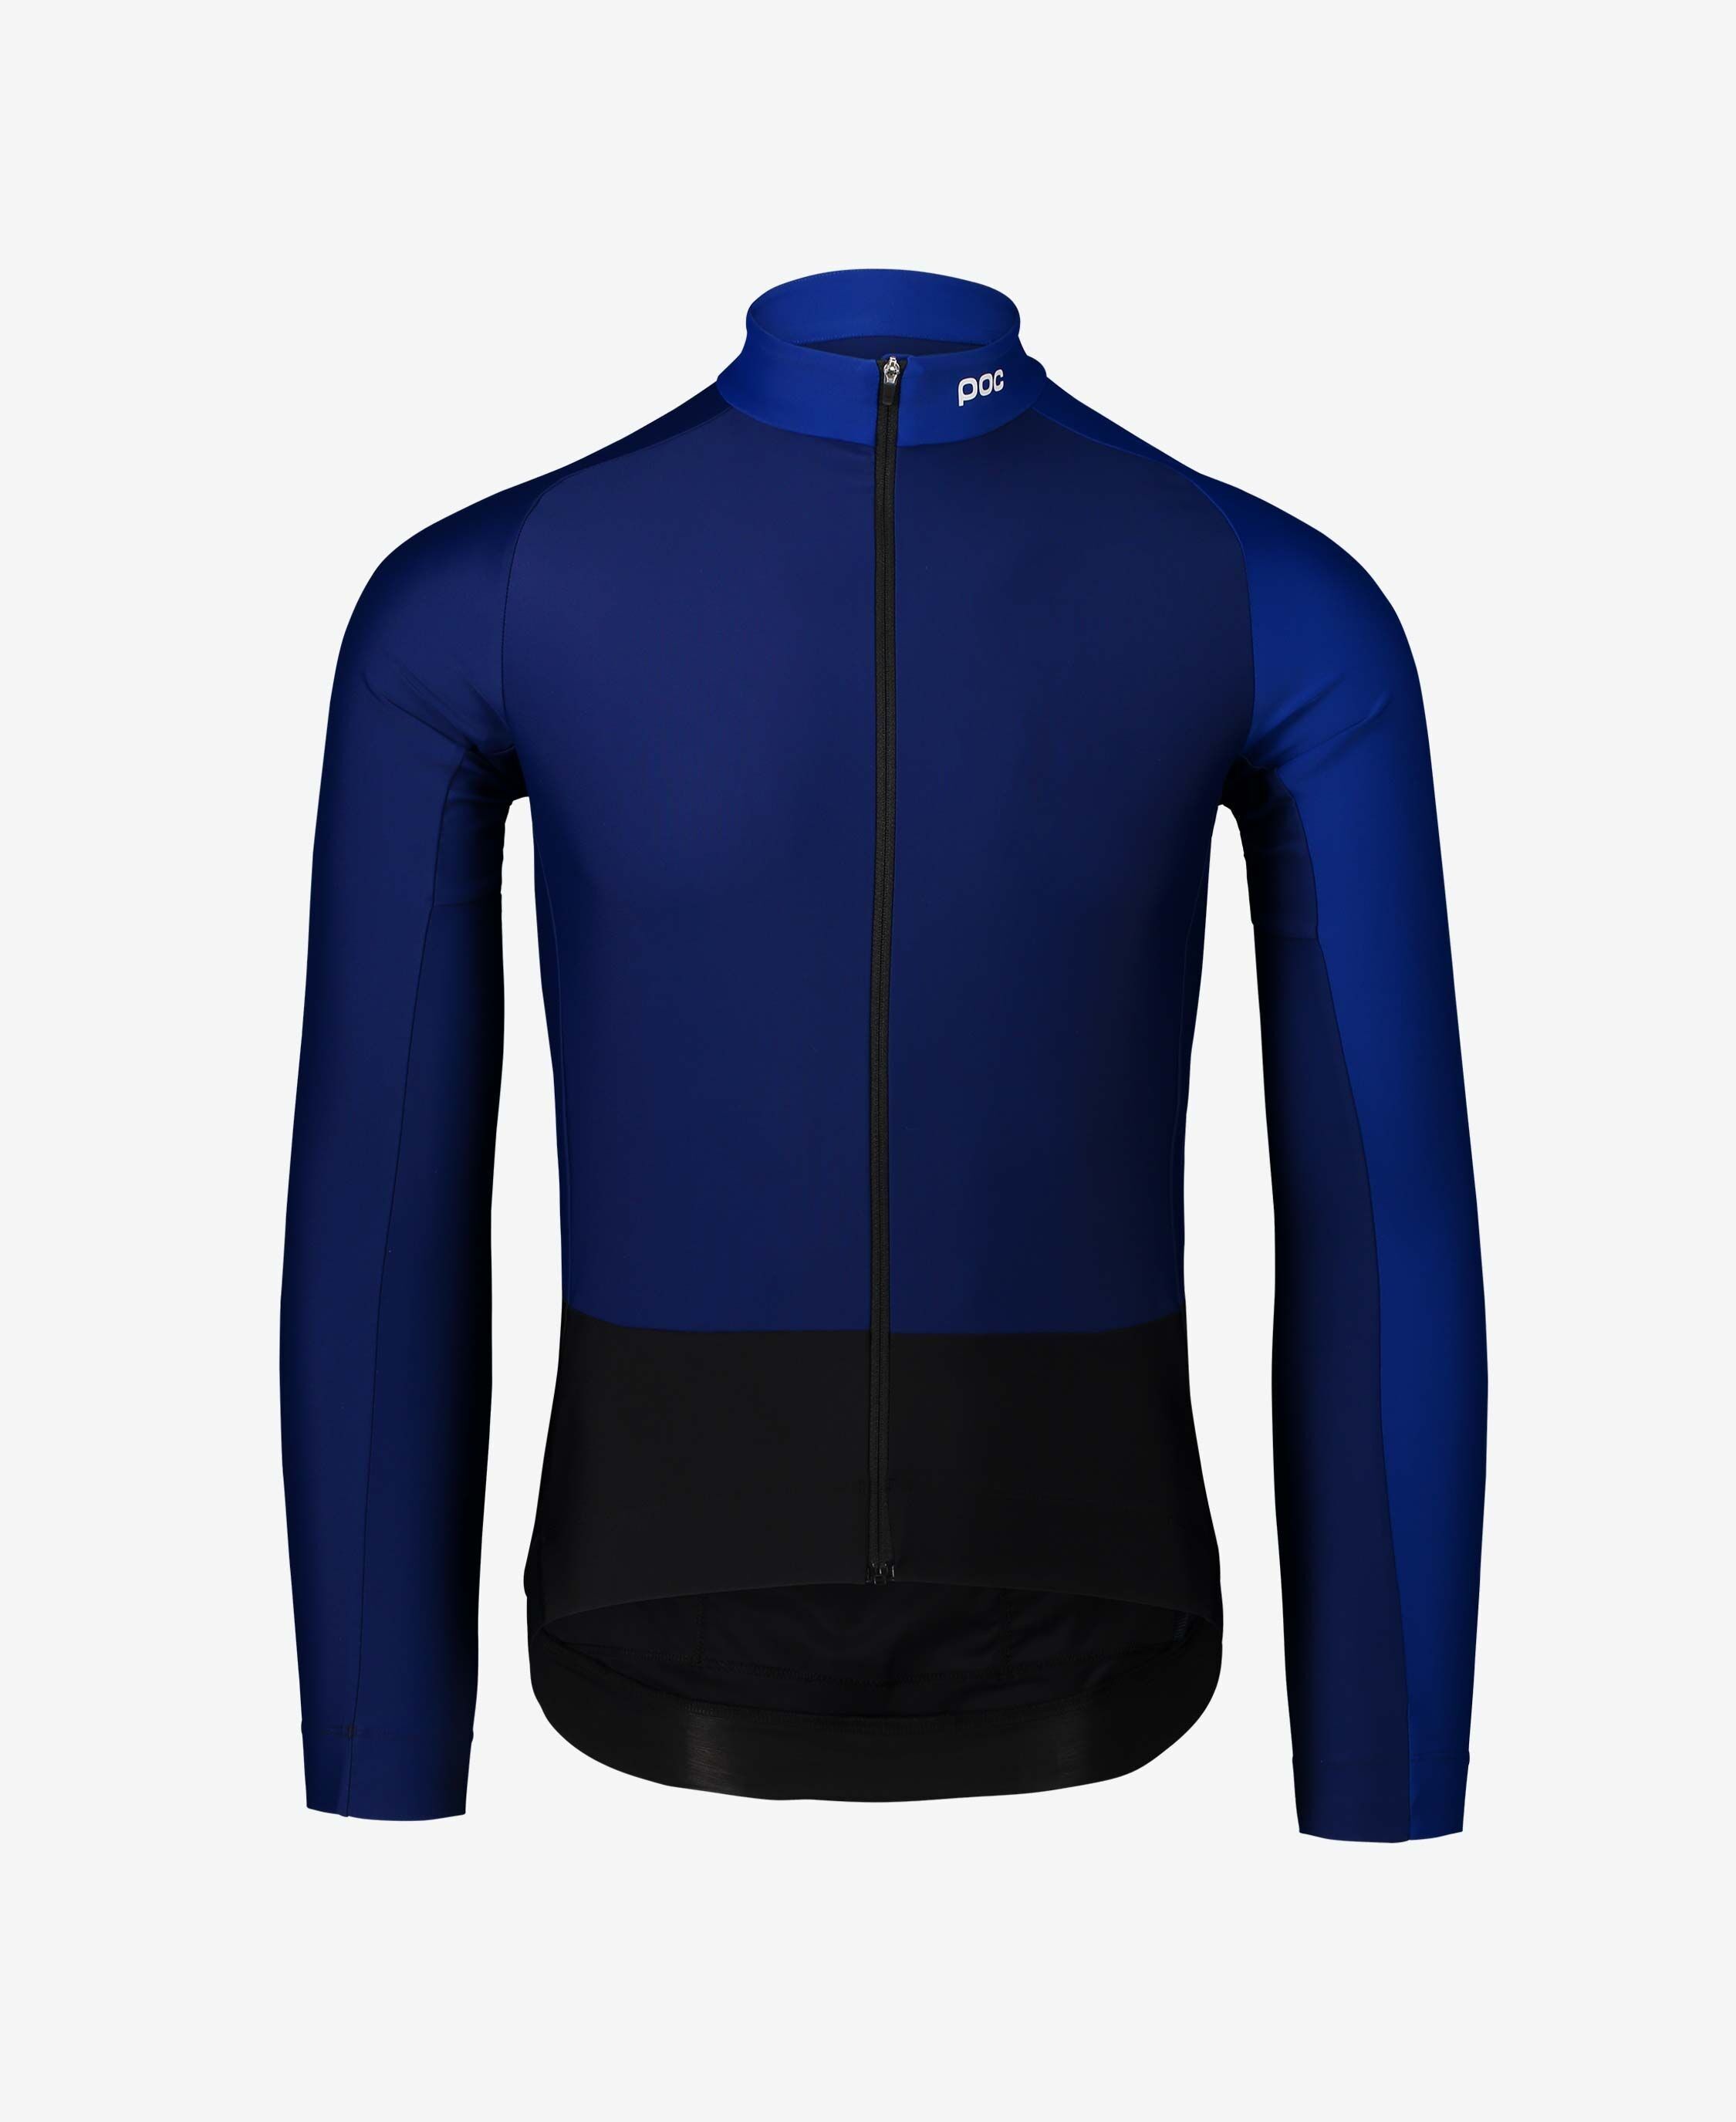 Poc Essential Road Mid LS Jersey - Cycling jersey - Men's